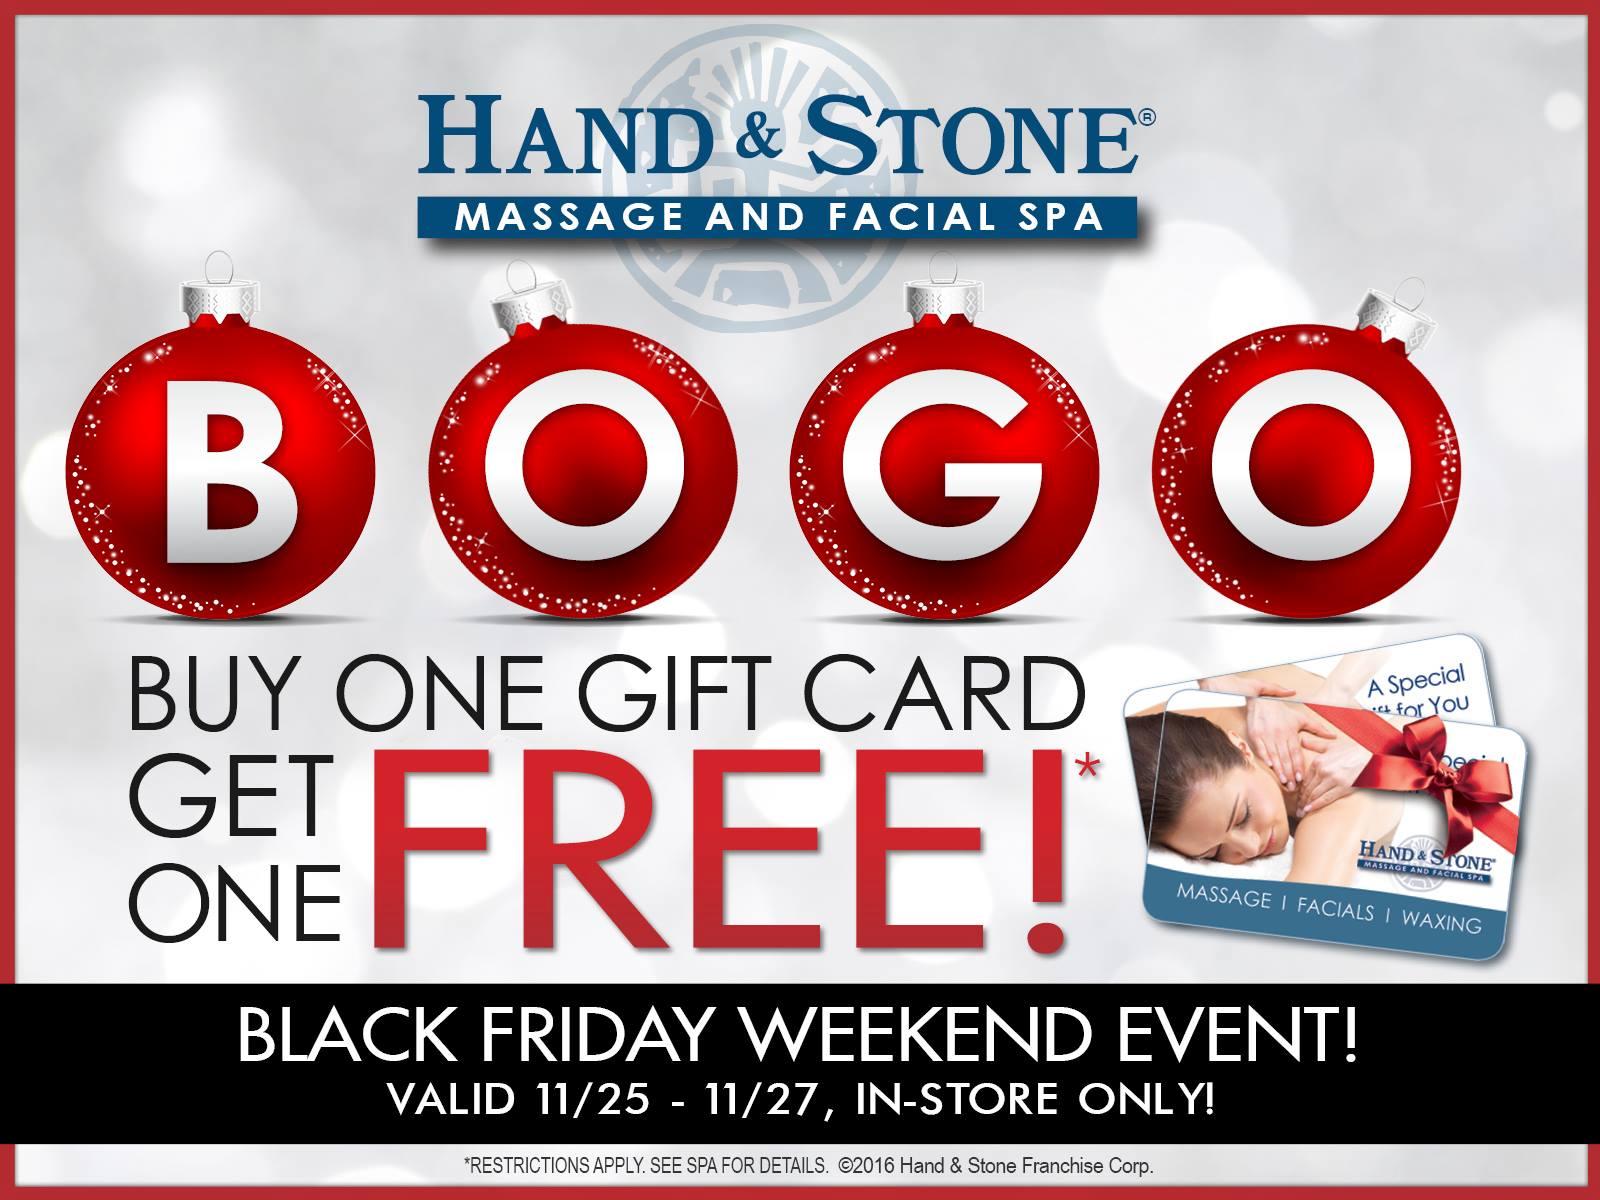 Hand and Stone Massage and Facial Spa Coupons near me in Philadelphia